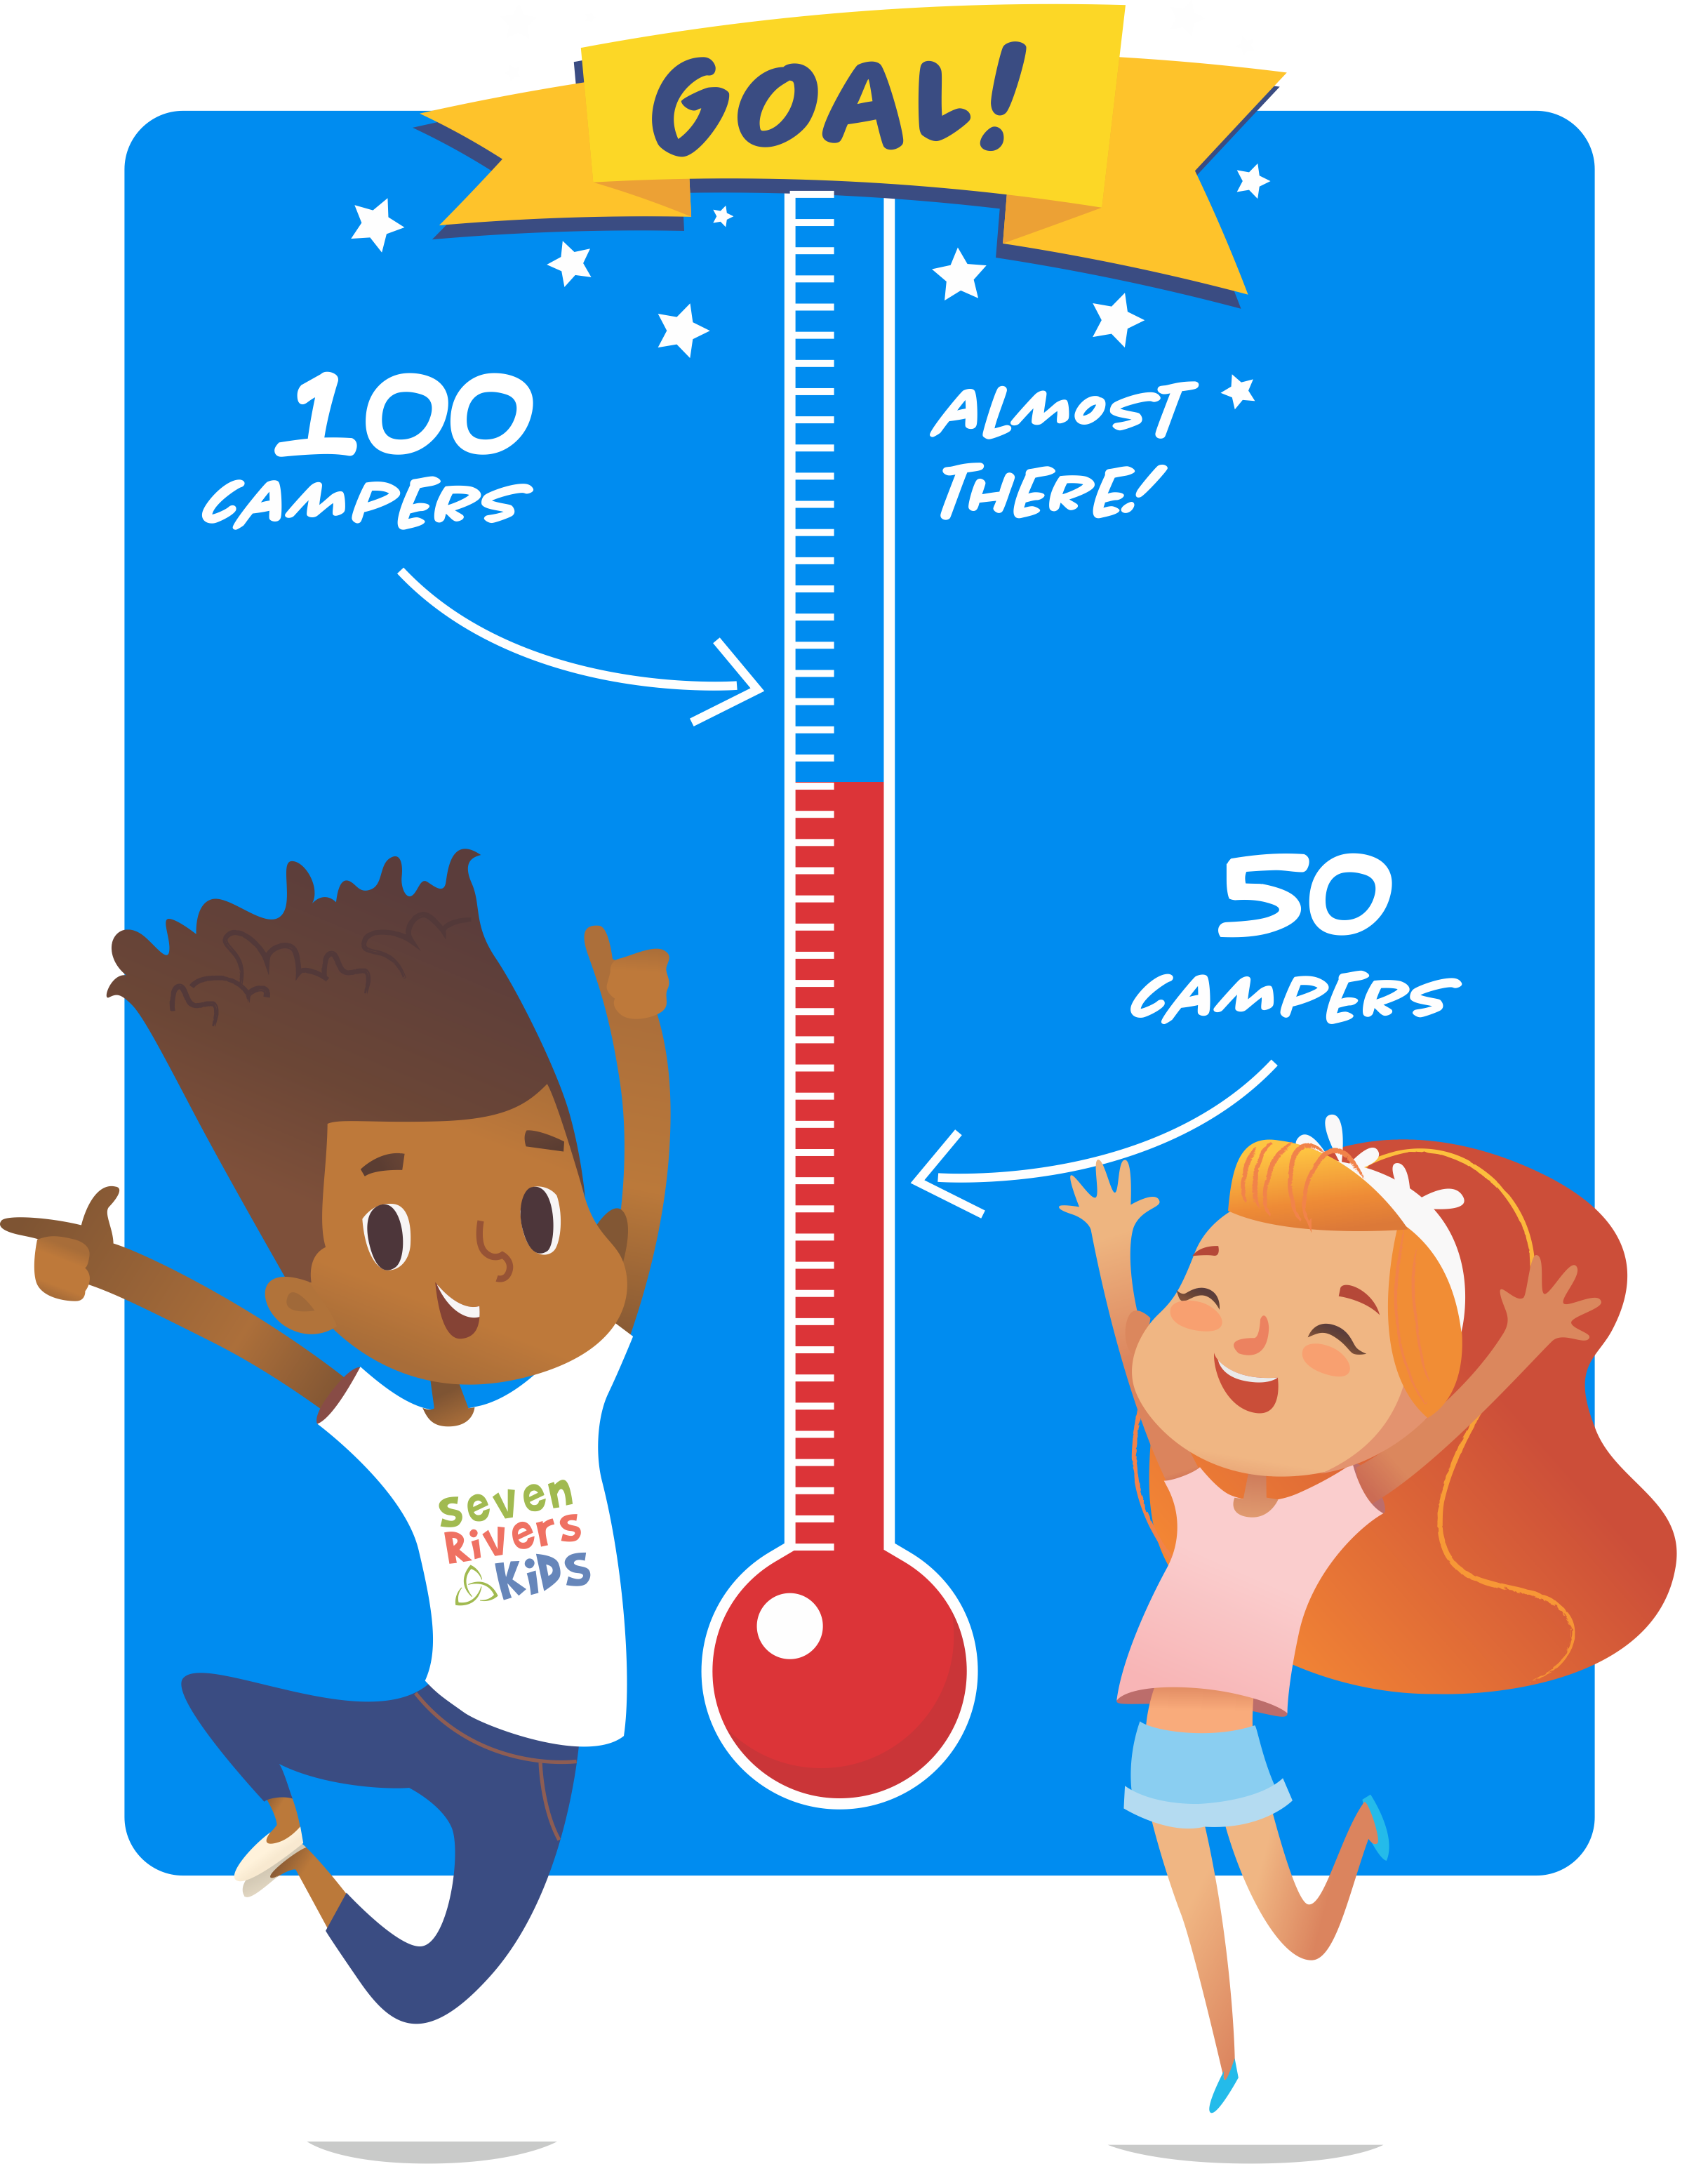 Camp Goals Website Thermometer-4